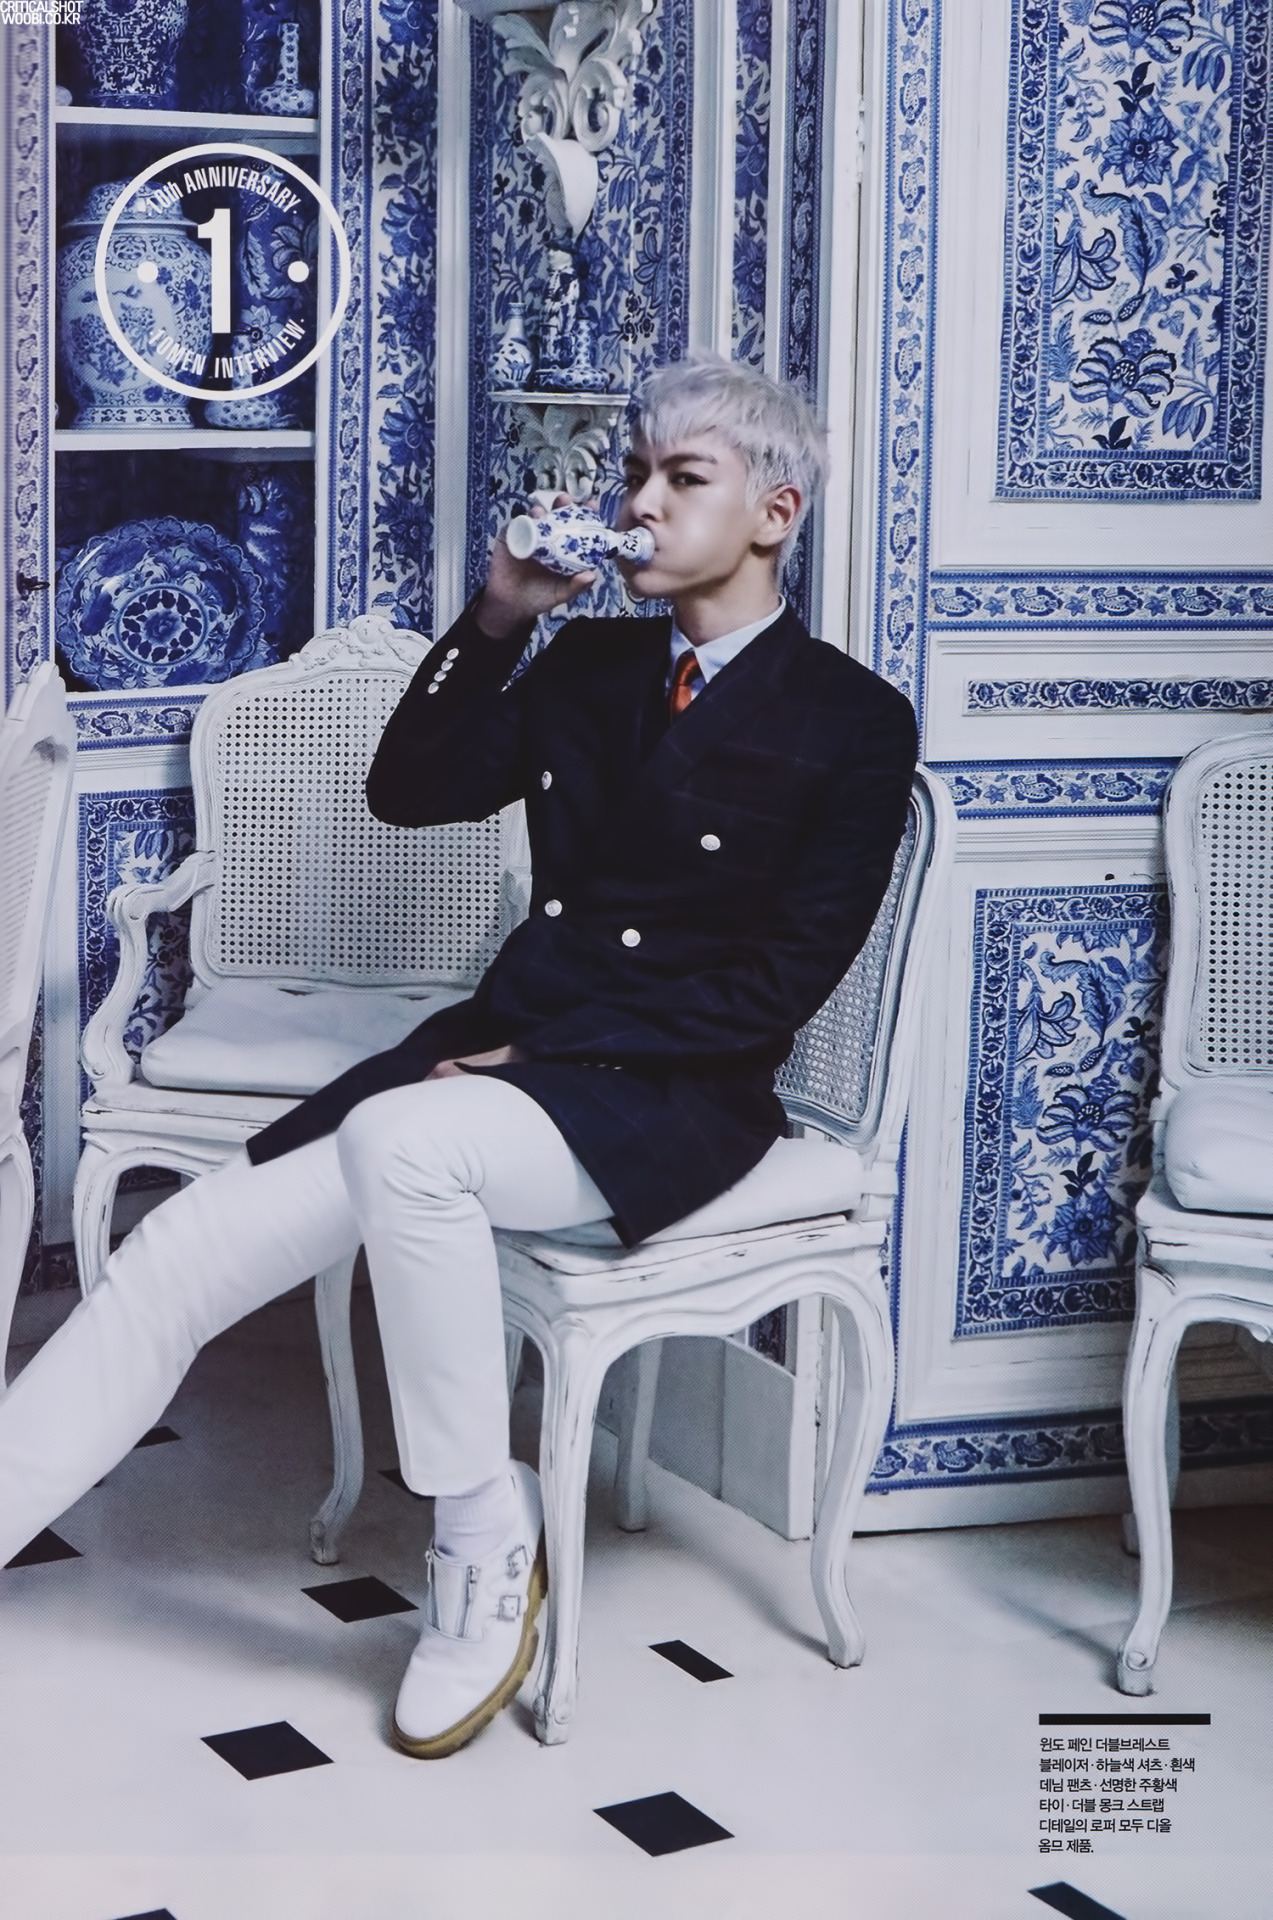 TOP Arena Homme March 2016 scans by CriticalShot (10).png